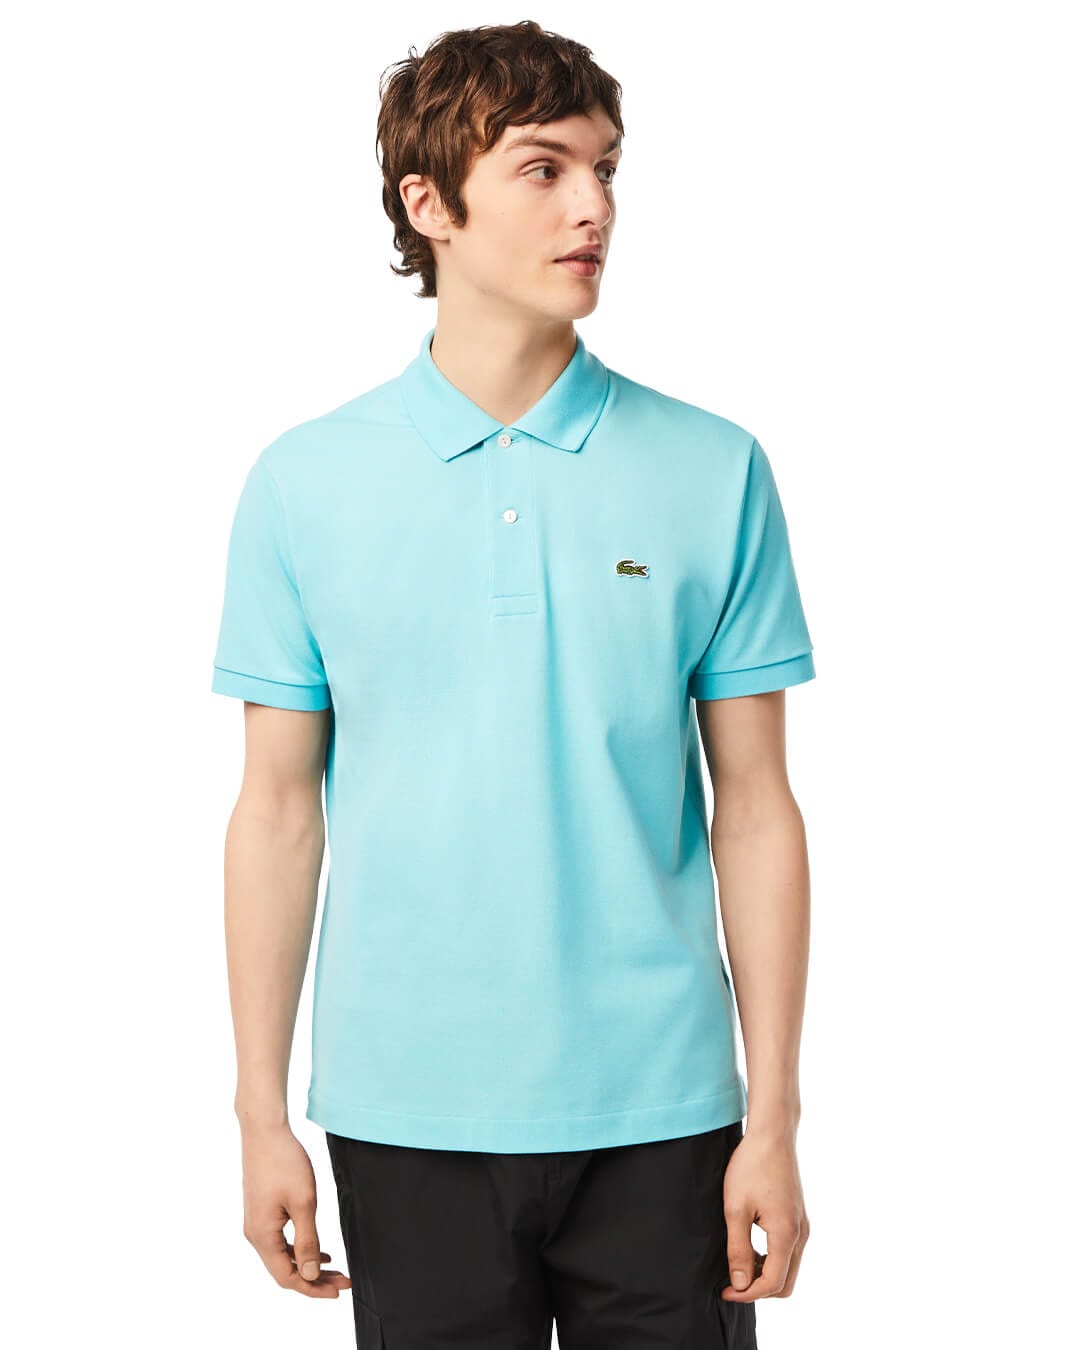 Lacoste Polo Shirts Lacoste Classic Fit L.12.12 Beige Polo Shirt